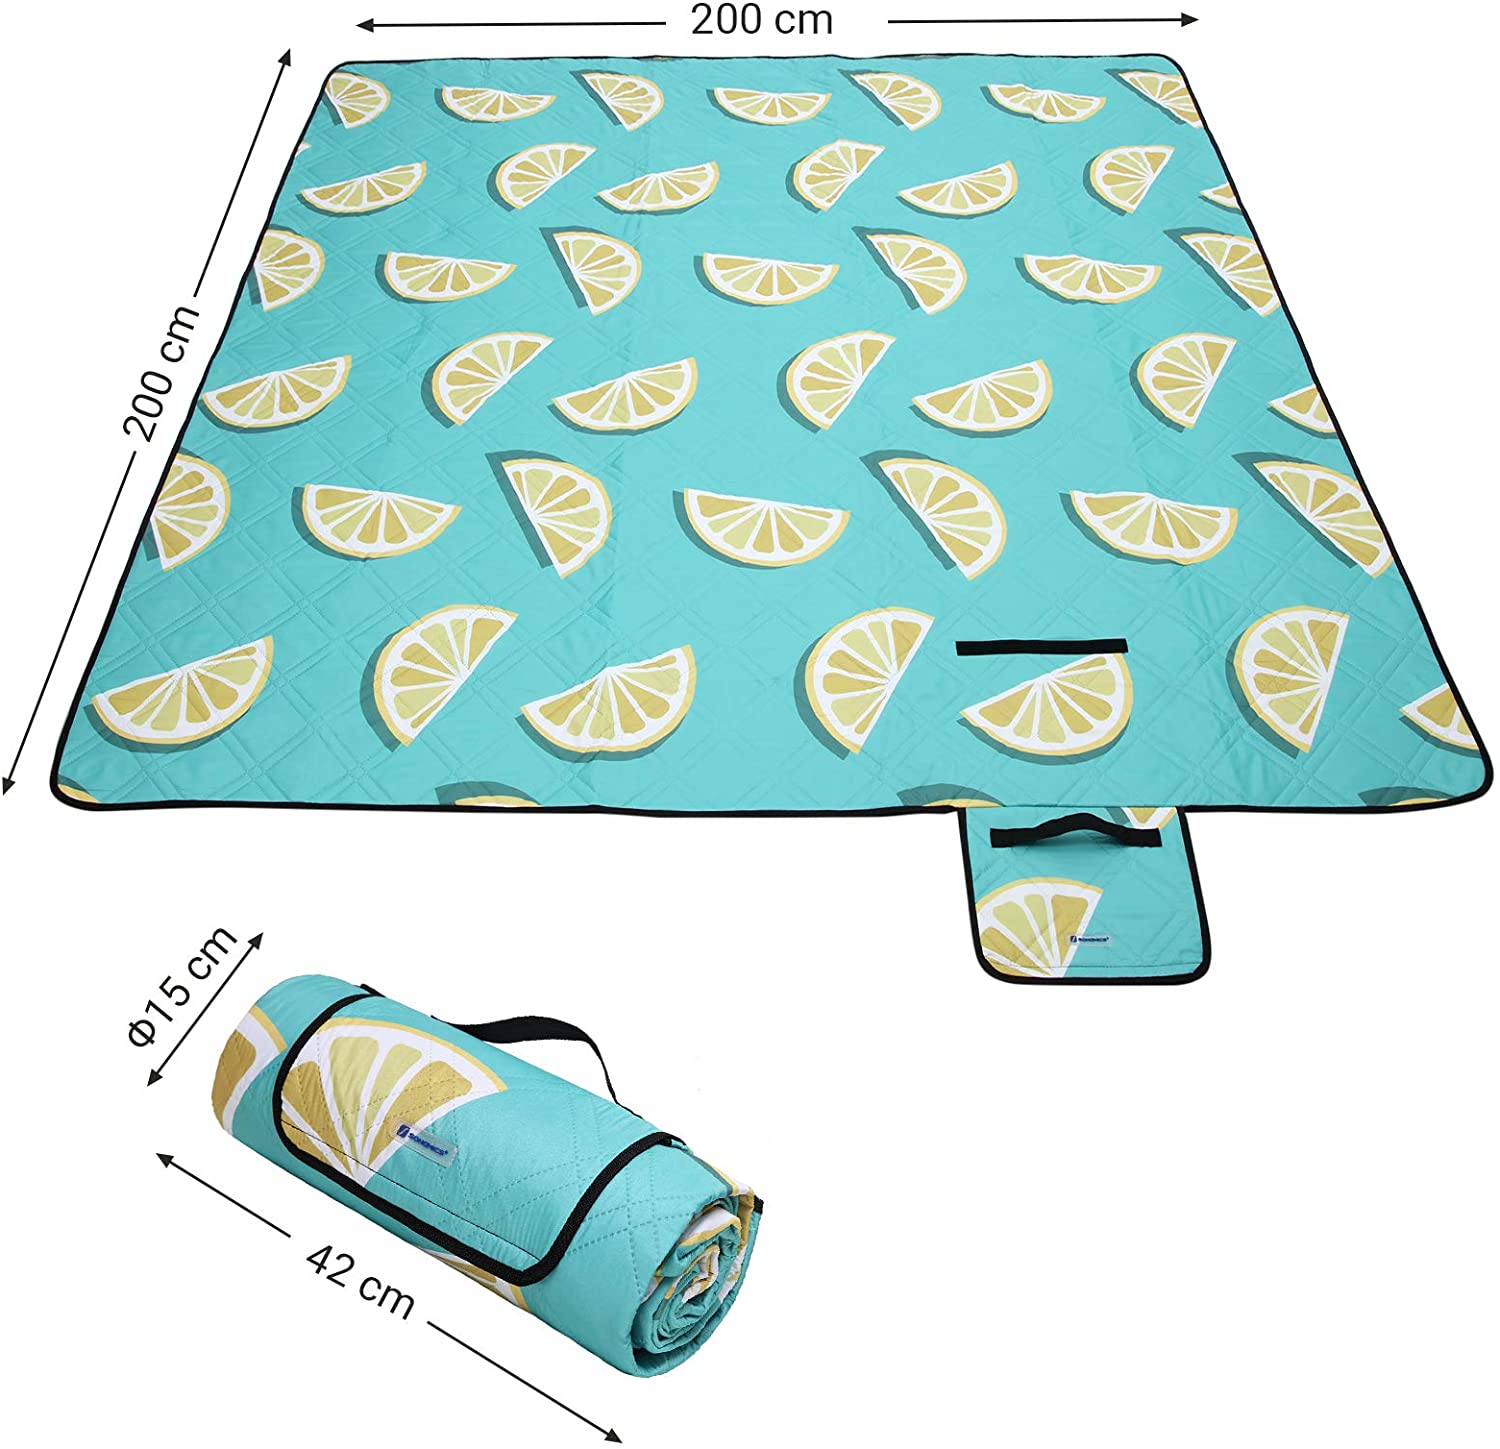 Lemon Pattern GCM87YJ Machine Washable Park Yard 200 x 200 cm Foldable Outdoors with Waterproof Layer Large Camping Picnic Rug and Mat for Beach SONGMICS Picnic Blanket